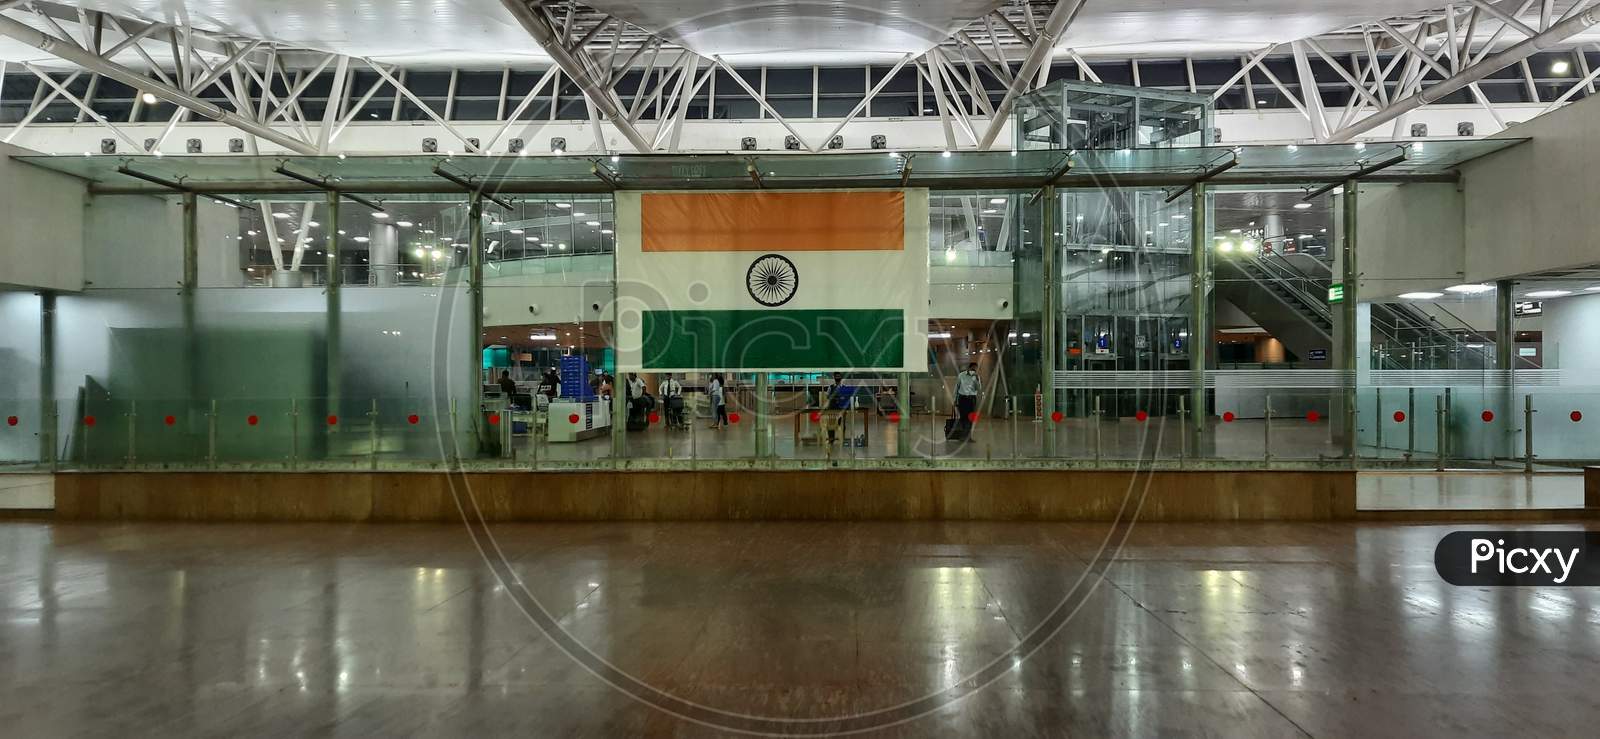 Airport ahmedabad in india